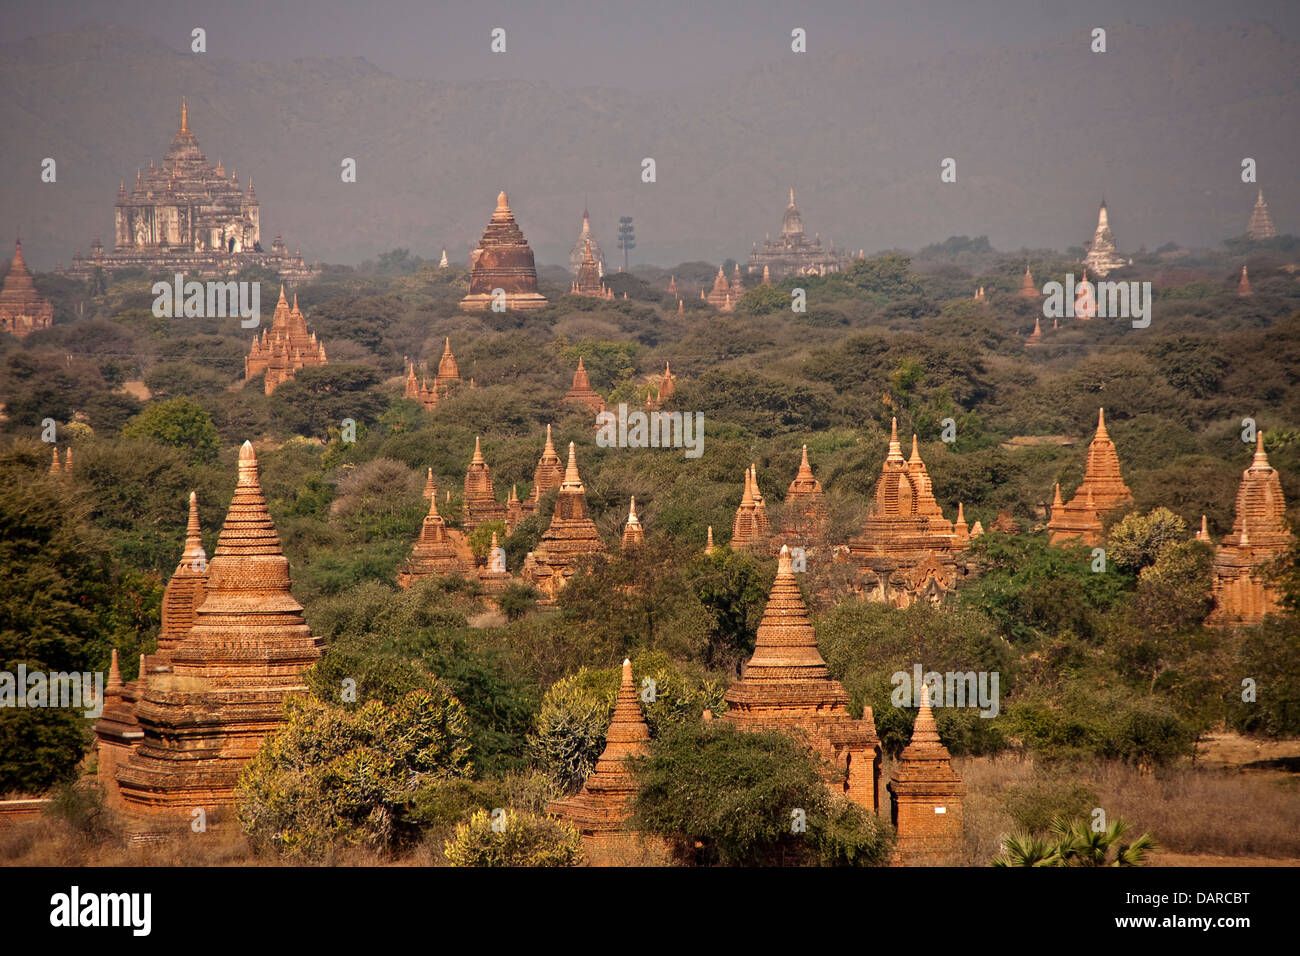 Buddhist pagodas and temples fill the Bagan Plain. Stock Photo